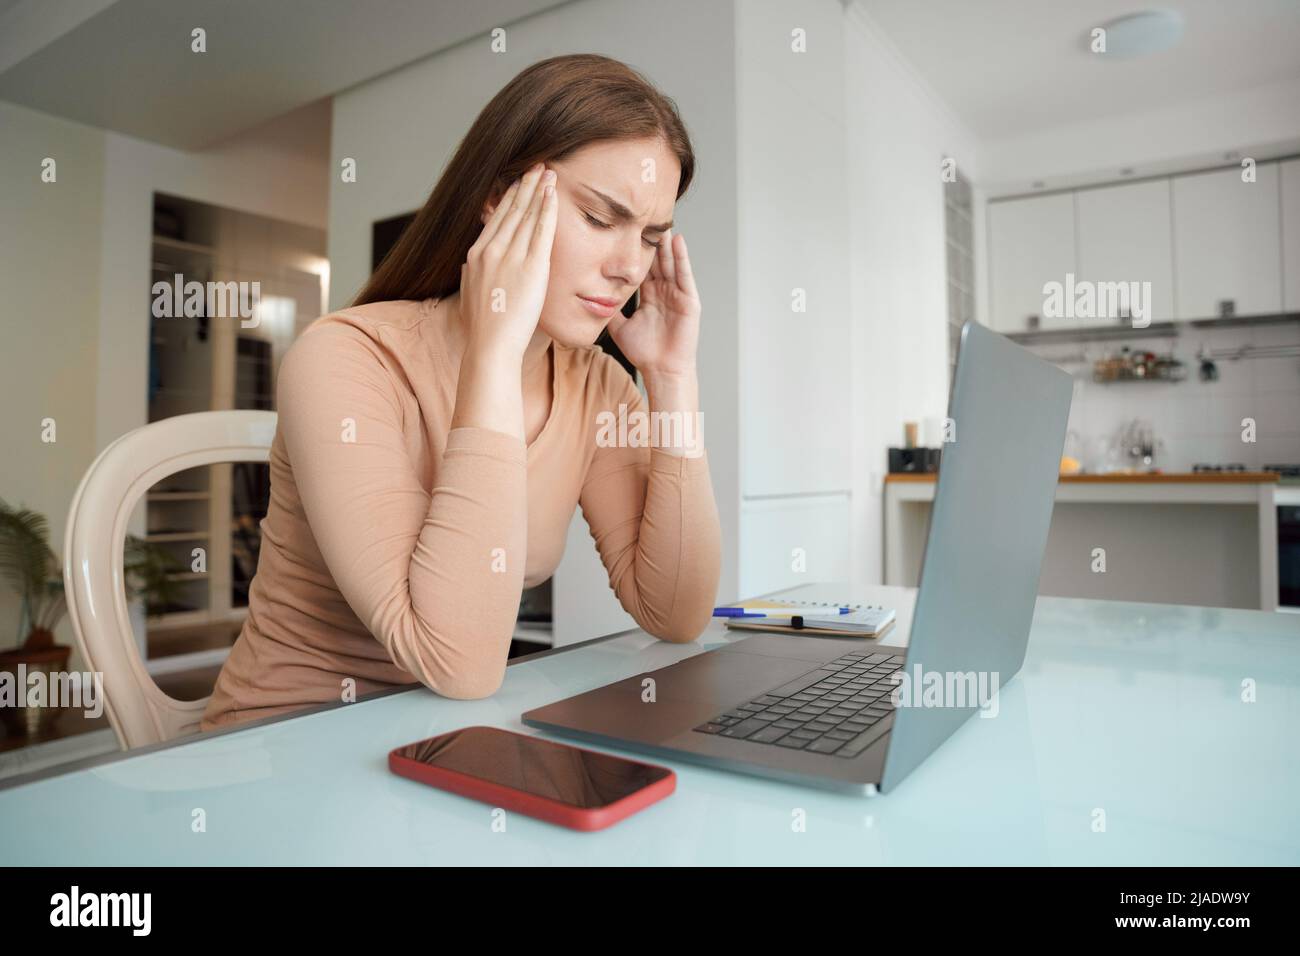 Stressed young woman suffering from headache after computer work Stock Photo